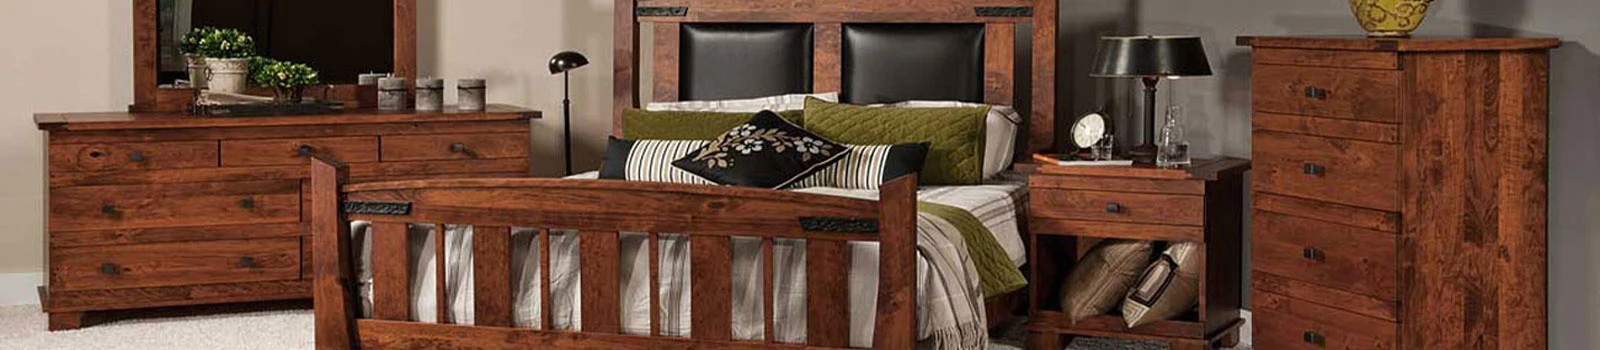 Clearance Price amish bedroom furniture